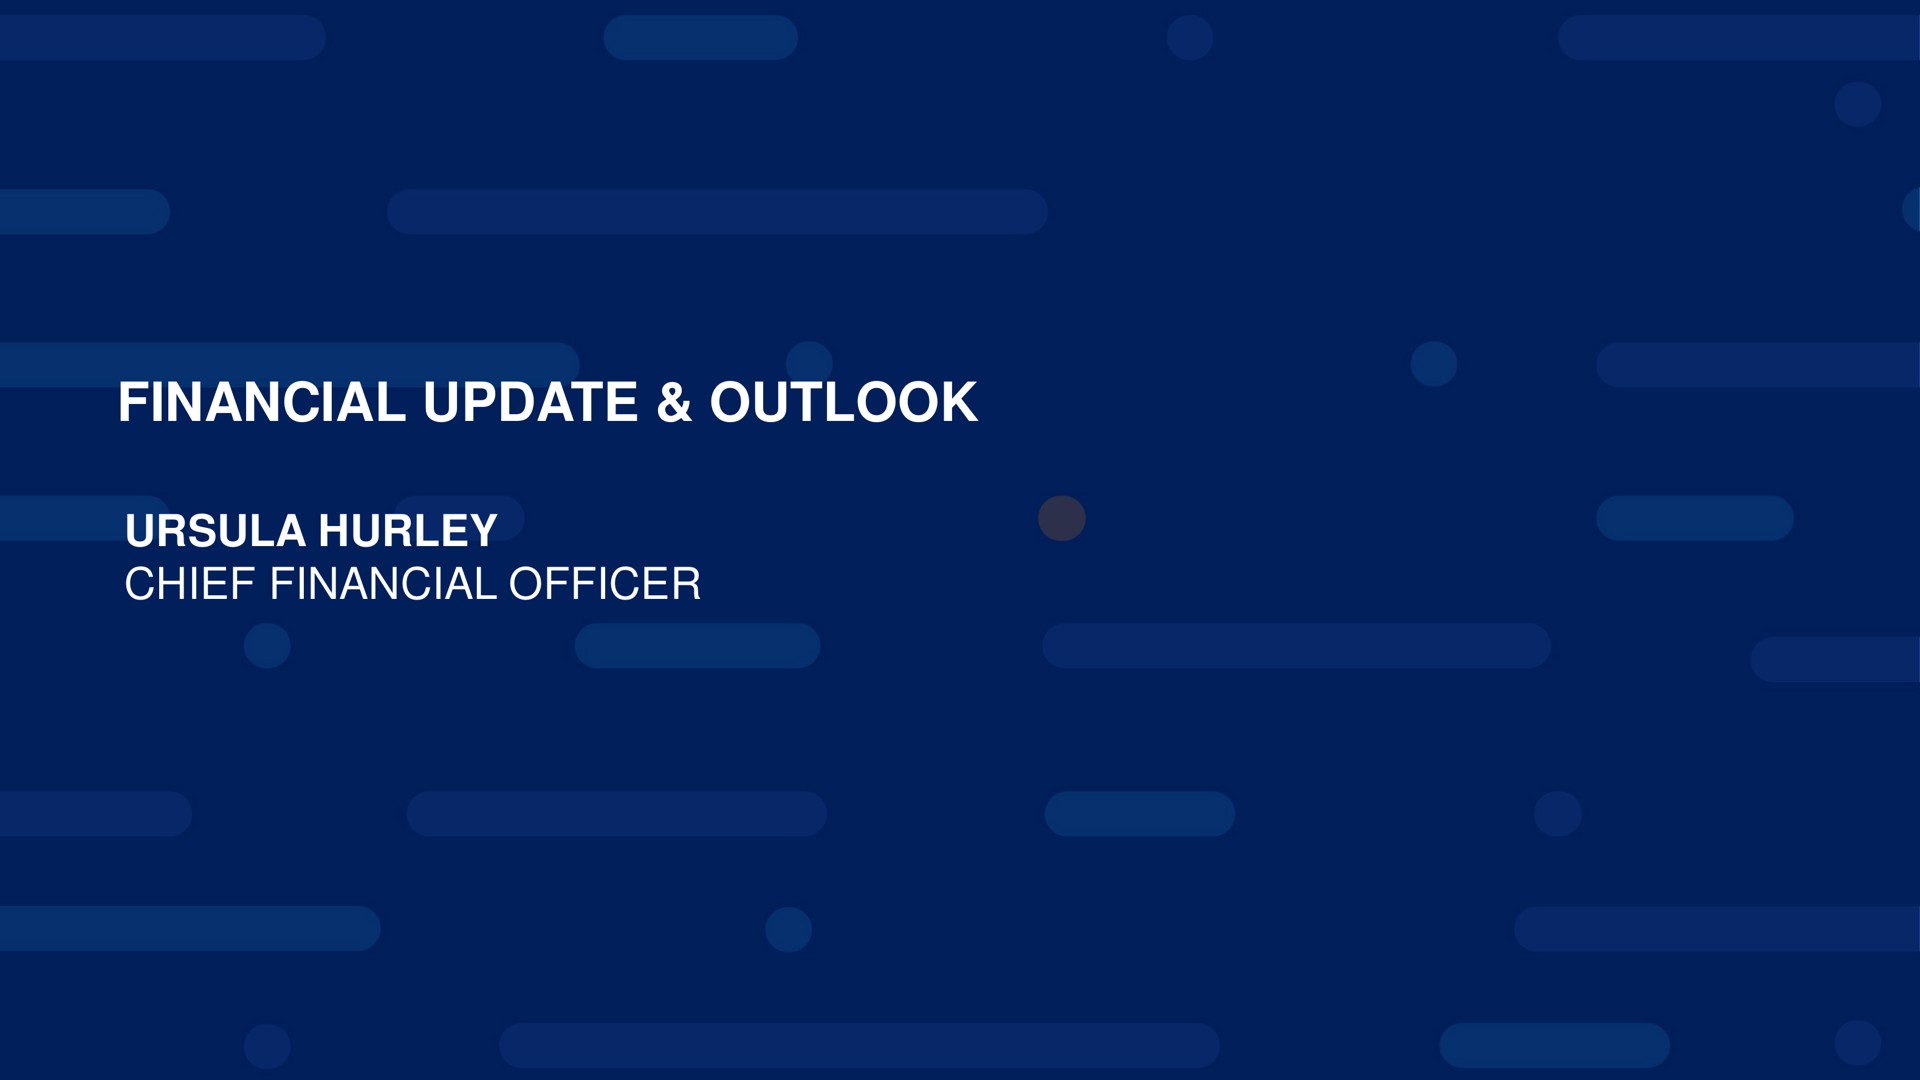 financial update outlook hurley chief financial officer | jetBlue